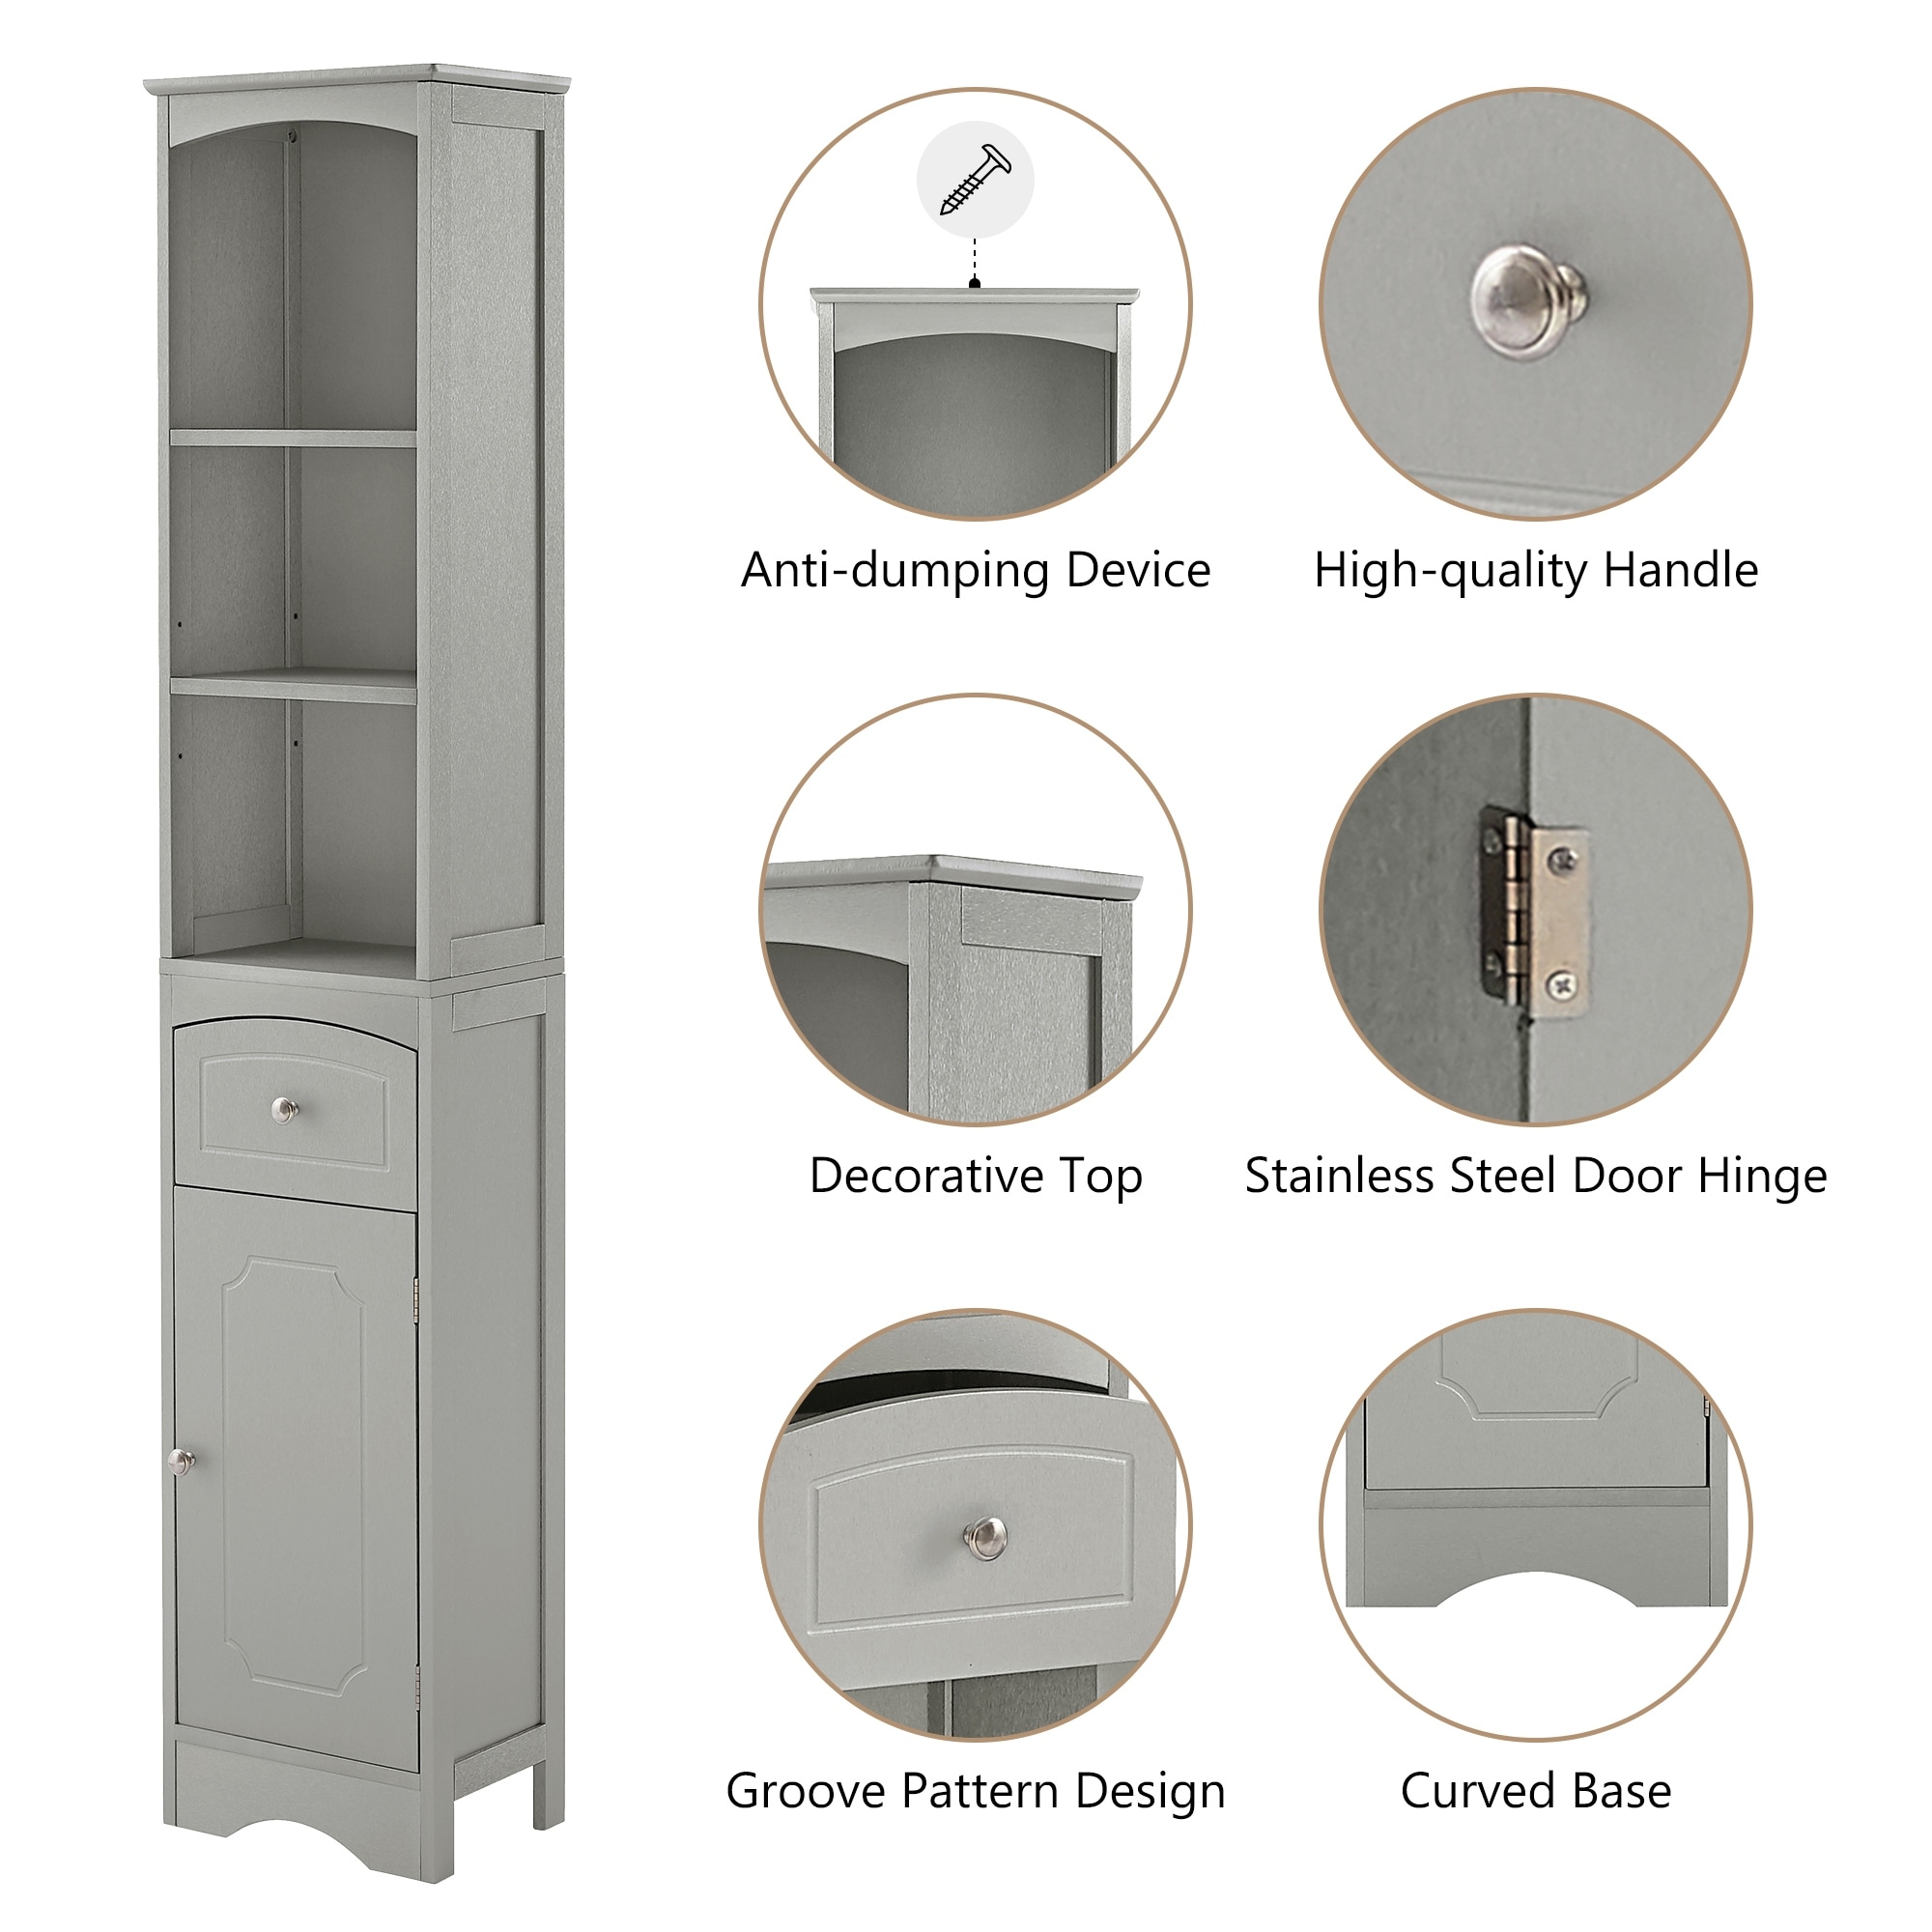 https://ak1.ostkcdn.com/images/products/is/images/direct/e8a1aab5db7aae7cd66605f14274fe315162f498/Nestfair-Freestanding-Bathroom-Cabinet-with-Drawer-and-Adjustable-Shelf.jpg